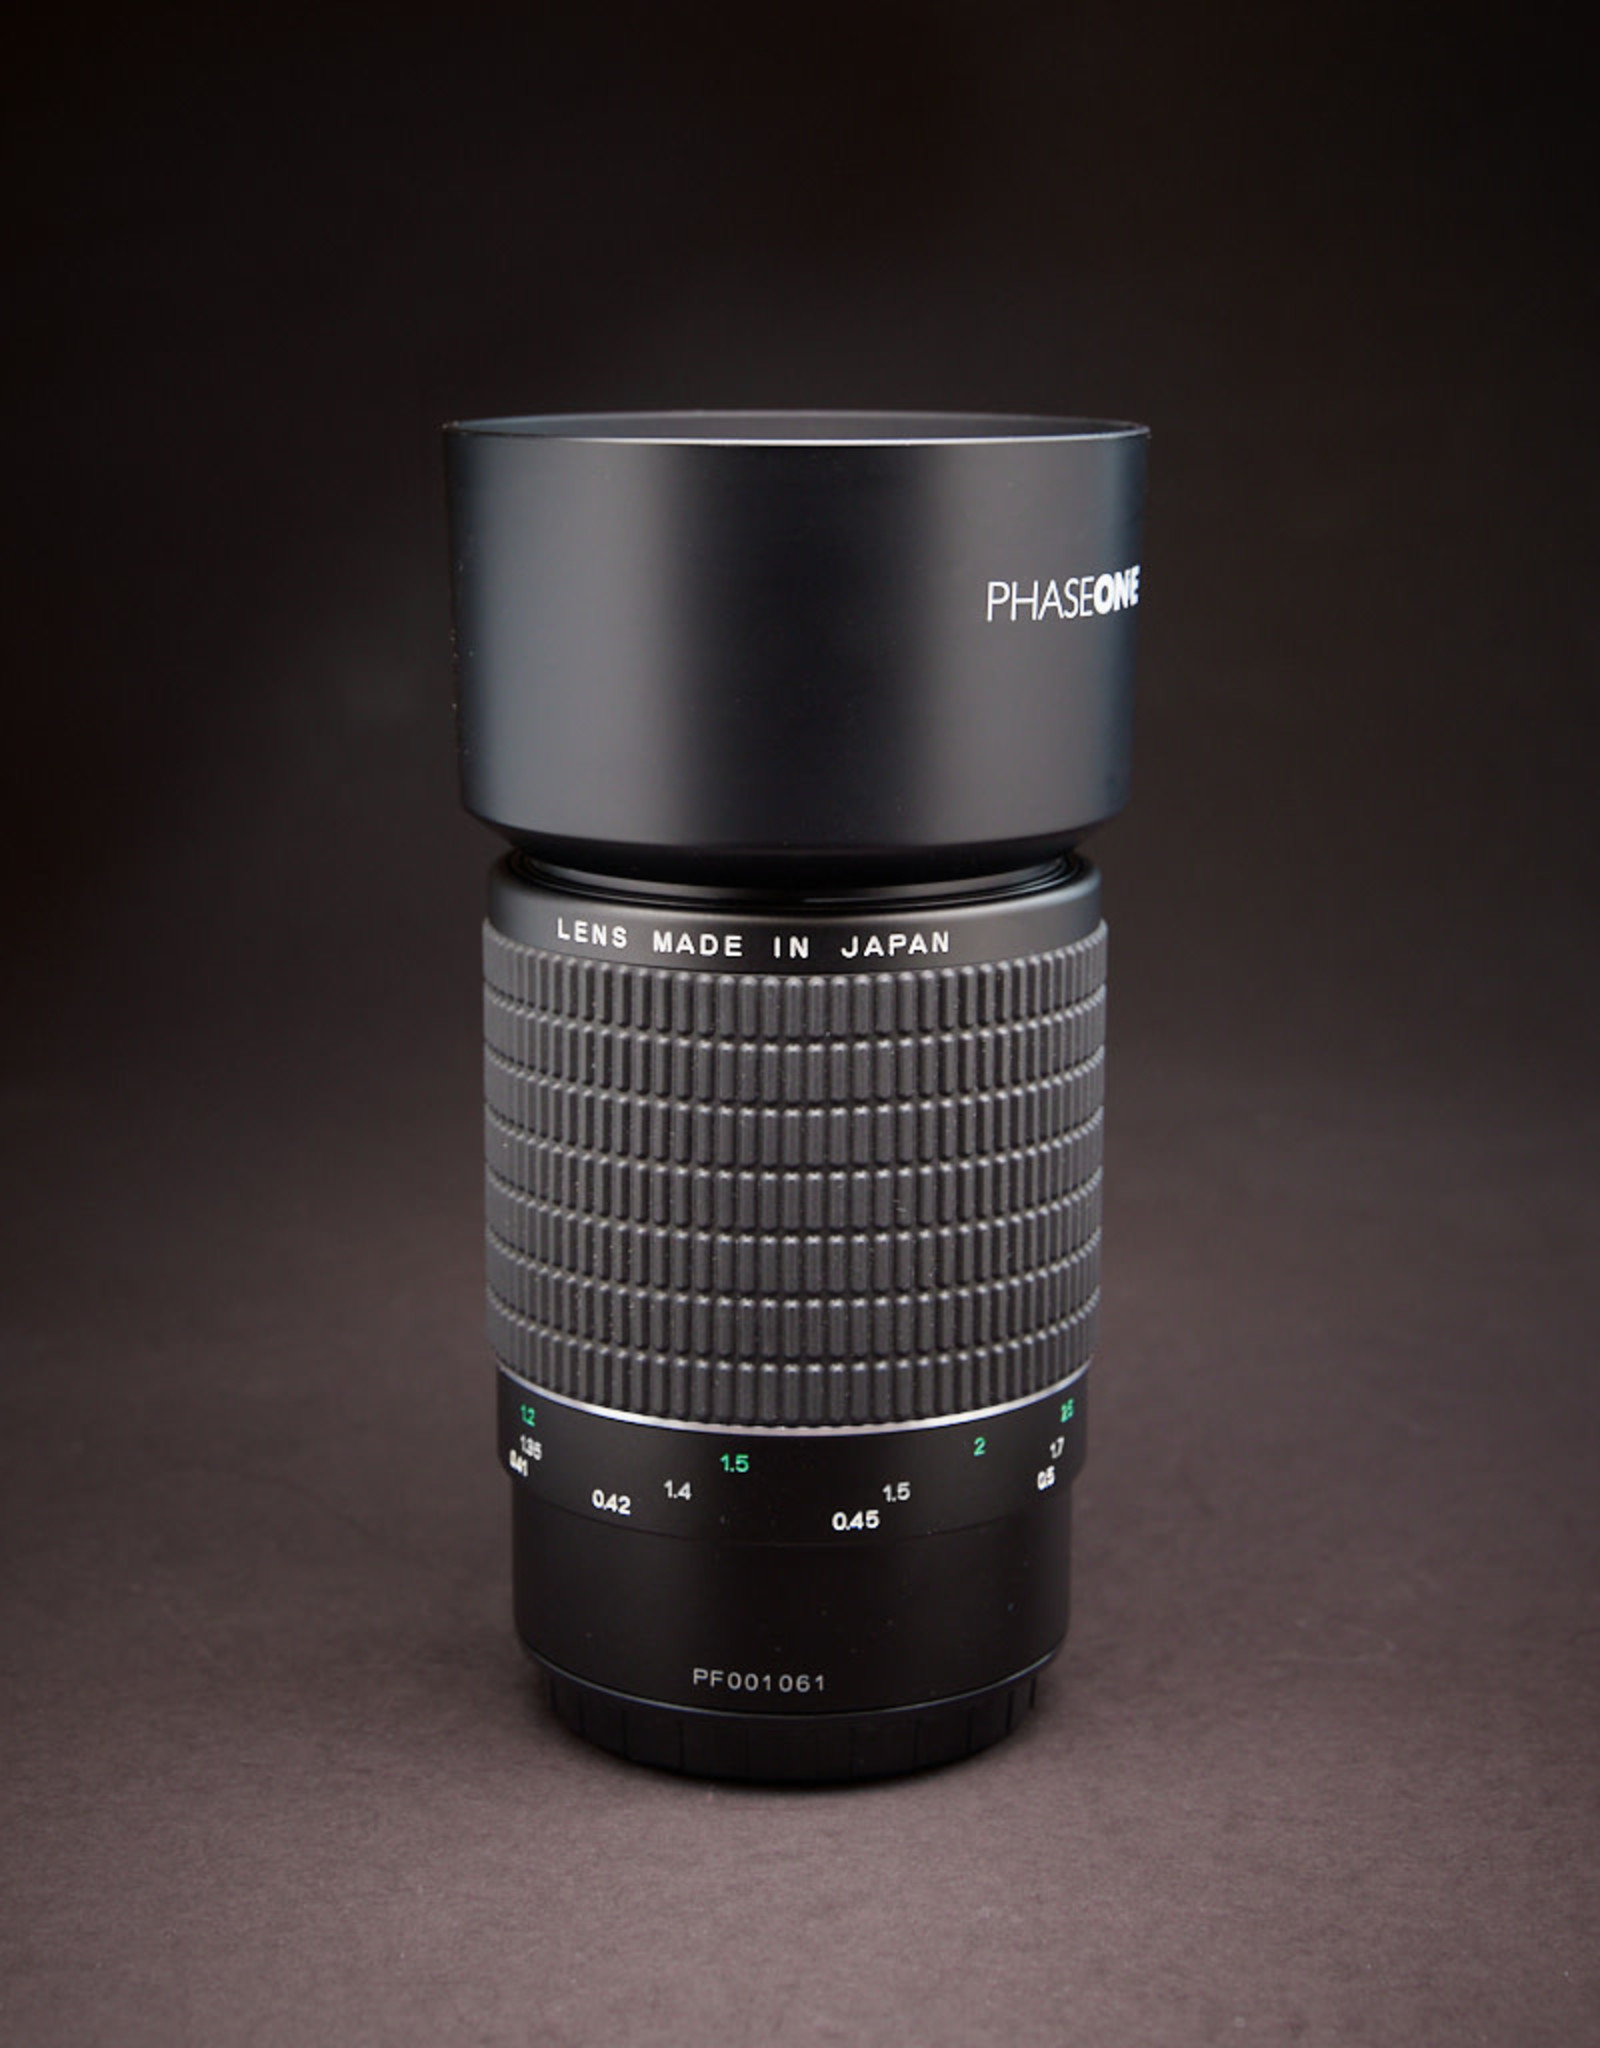 Phase One USED - Phase One 120mm F4 Macro Manual Focus Lens with hood and caps. Condition 8.5